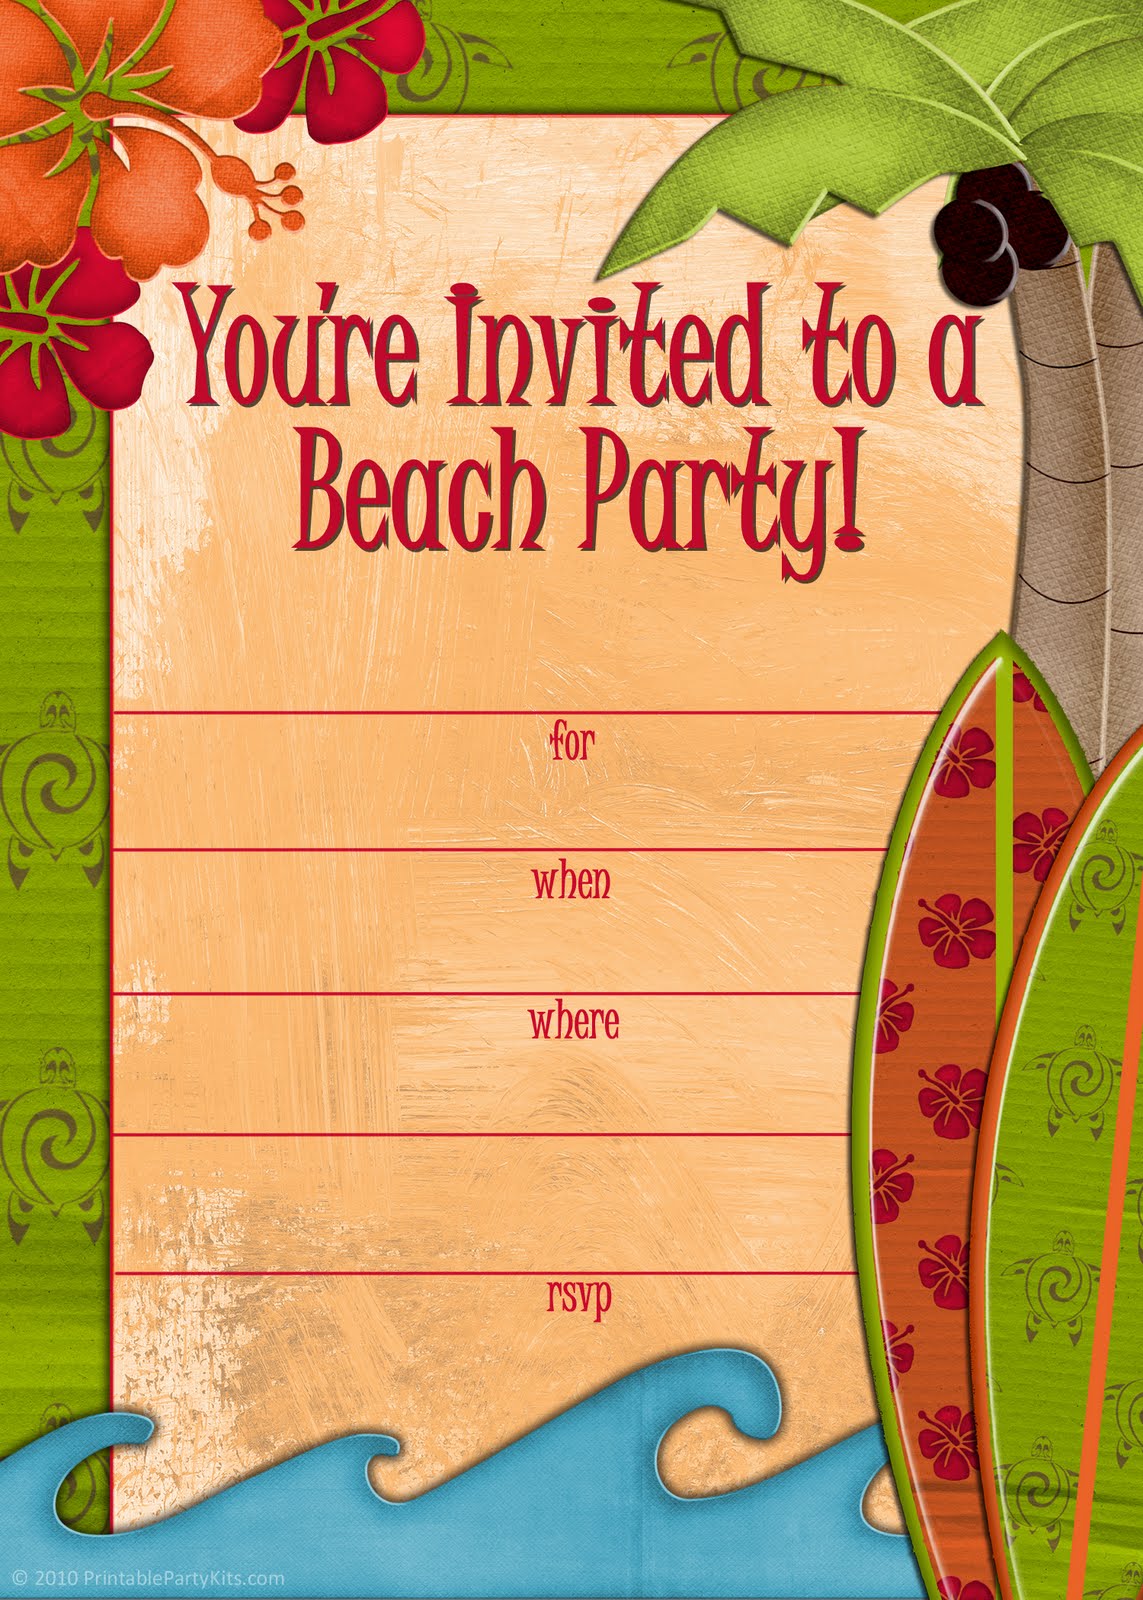 6-best-images-of-beach-party-invitations-free-printable-beach-party